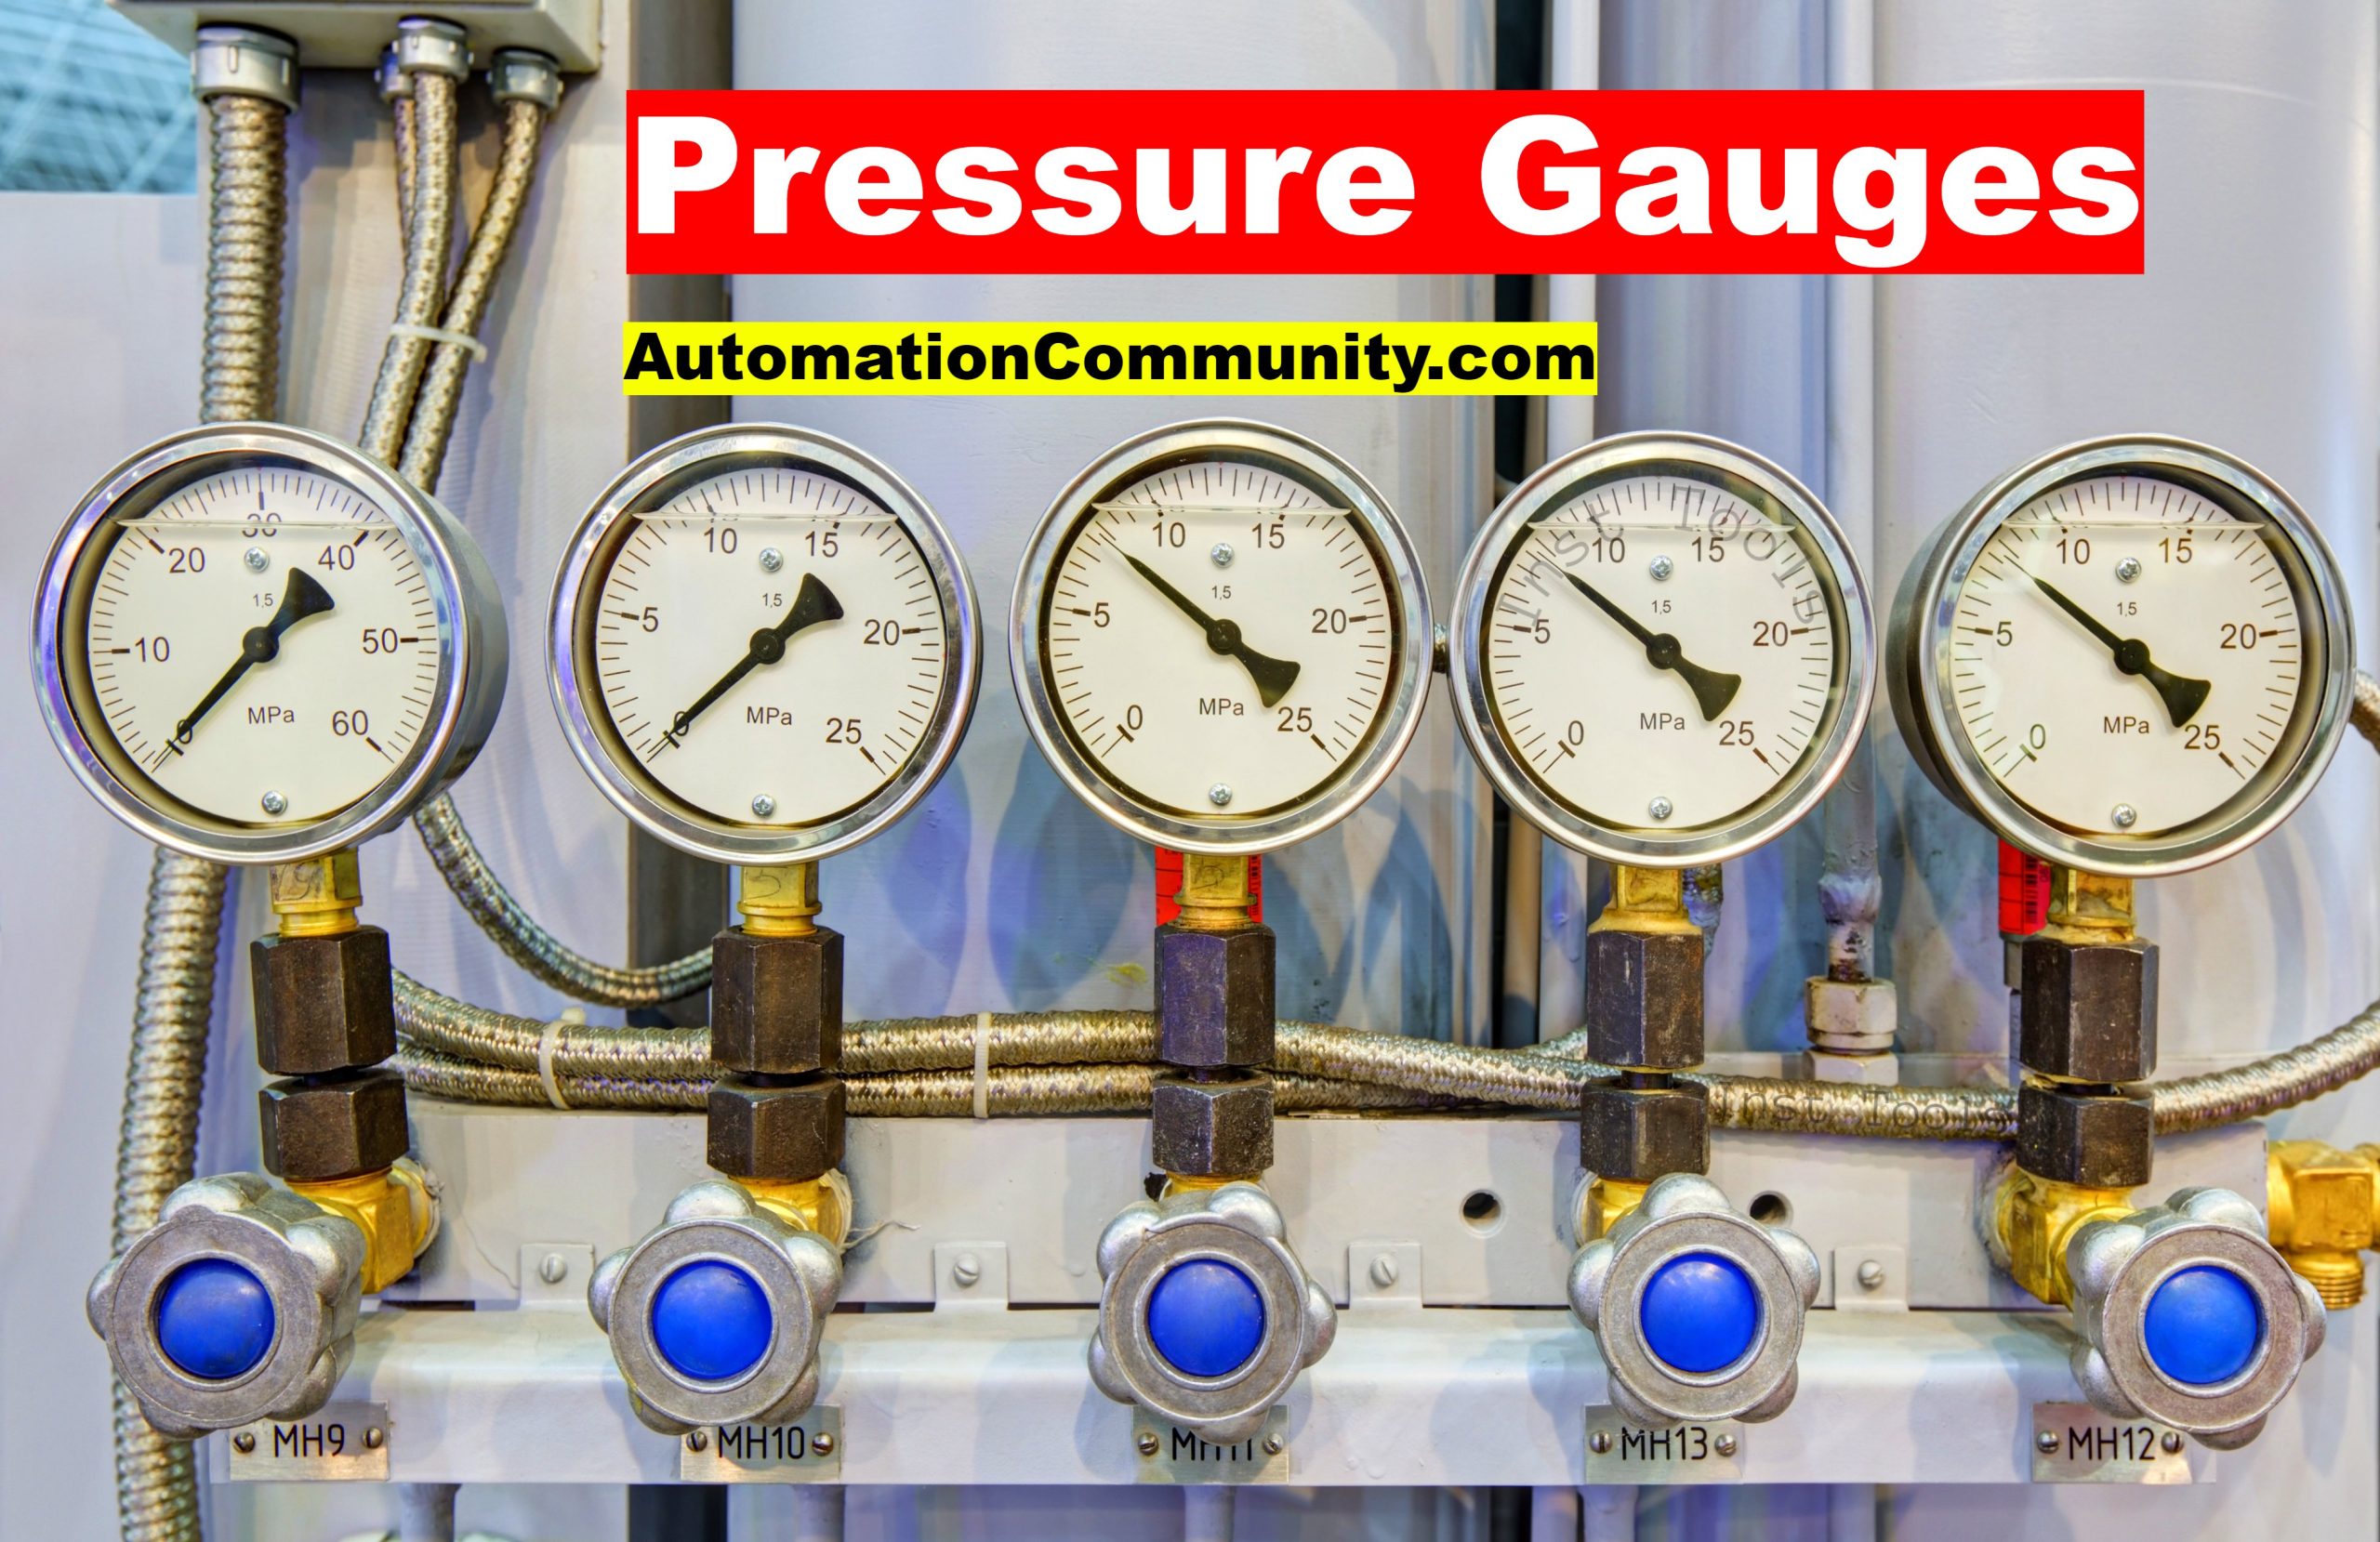 Pressure Gauge Questions and Answers